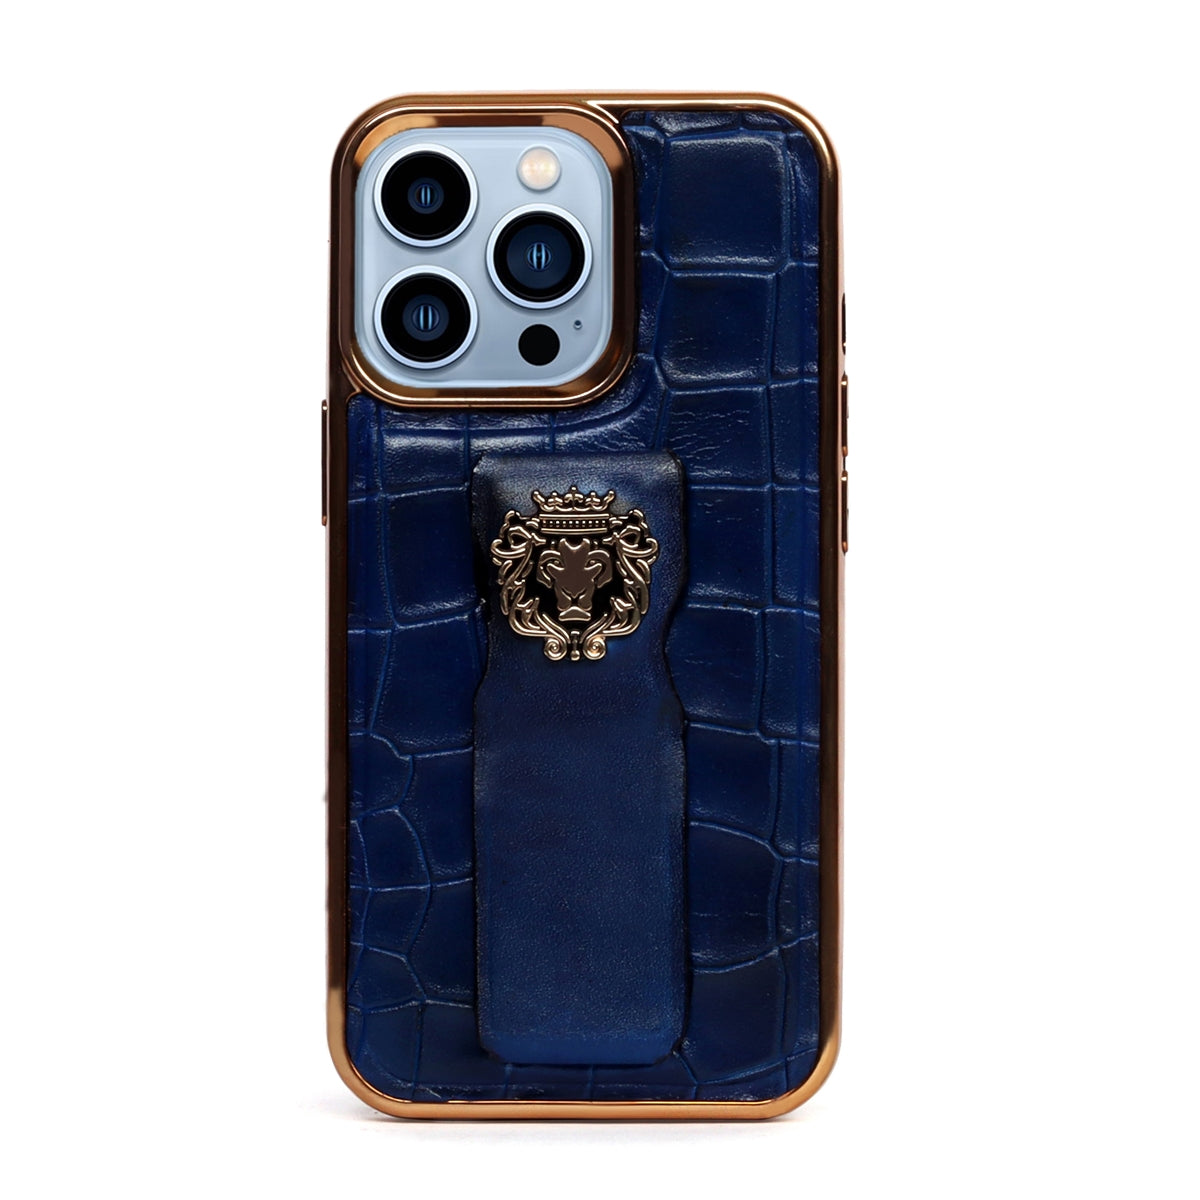 IPhone Series Blue Mobile Cover Golden Rim Finger strap cum Stand Croco Textured Leather with Metal Lion Logo by Brune & Bareskin